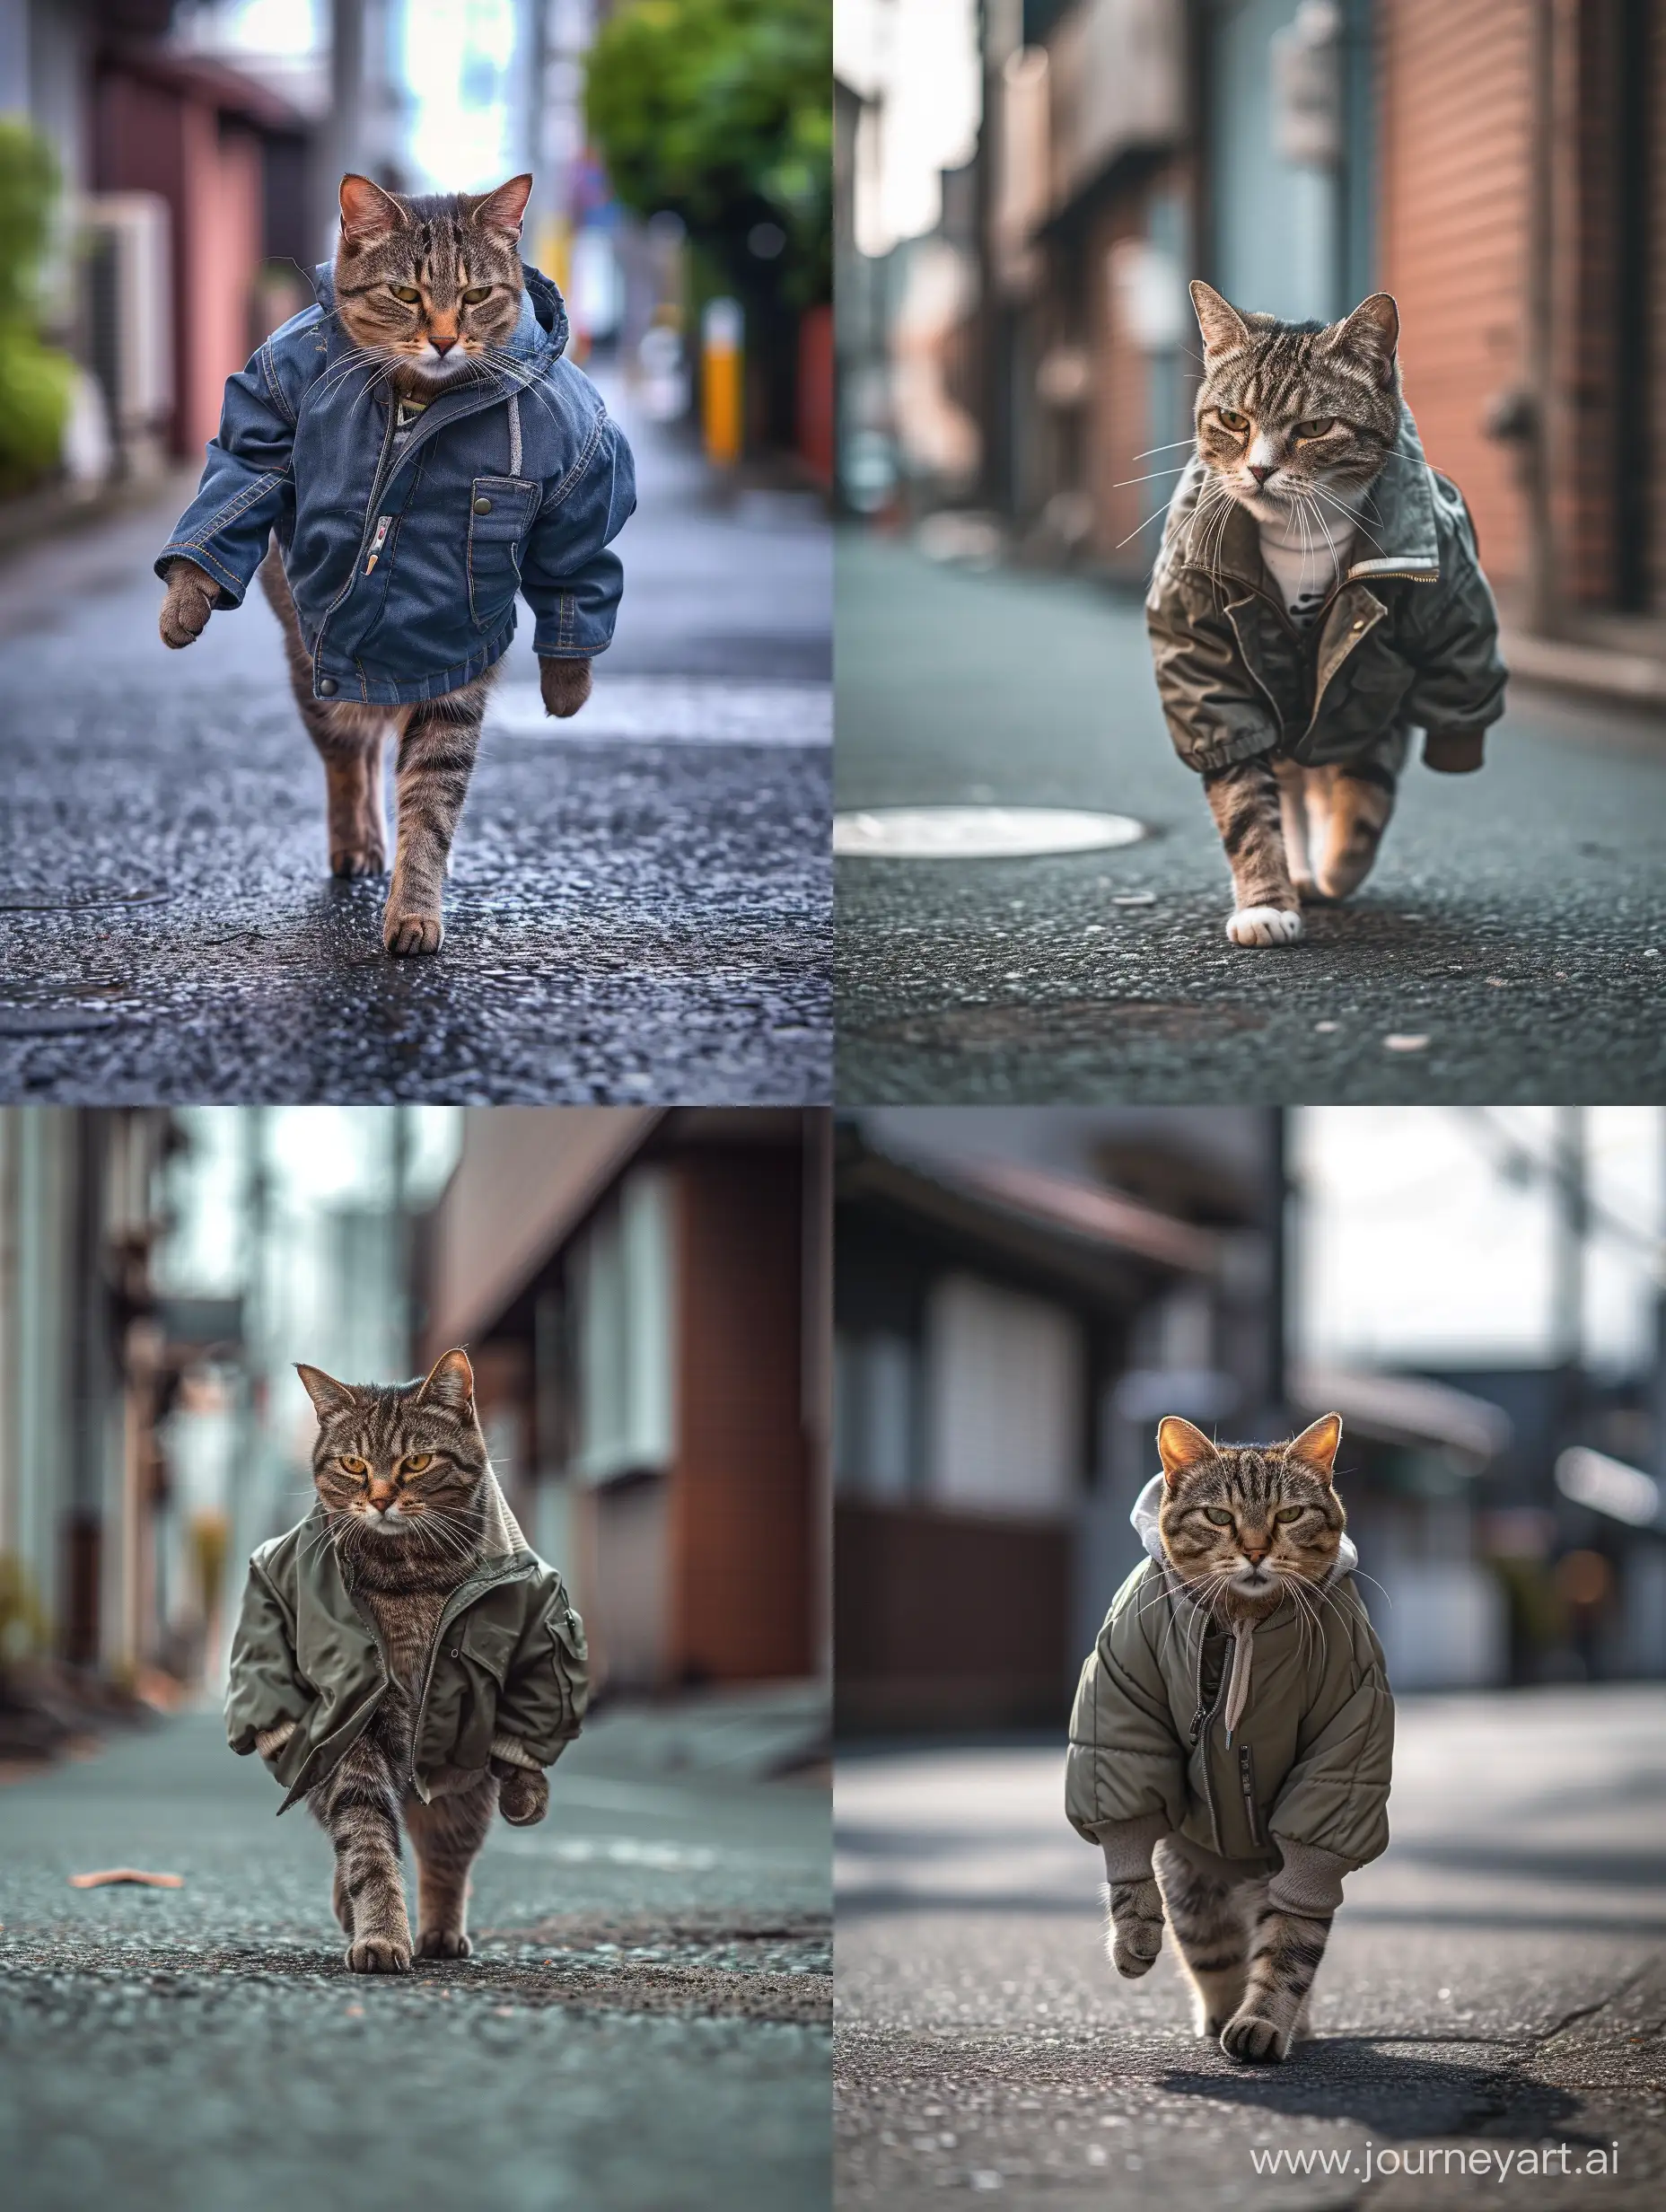 A cat wearing a casual jacket strolls down the street, exuding a fashionable aura. With a human-like posture, it poses like a supermodel. The 8k HDR best quality enhances the image, showcasing a realistic scene.

